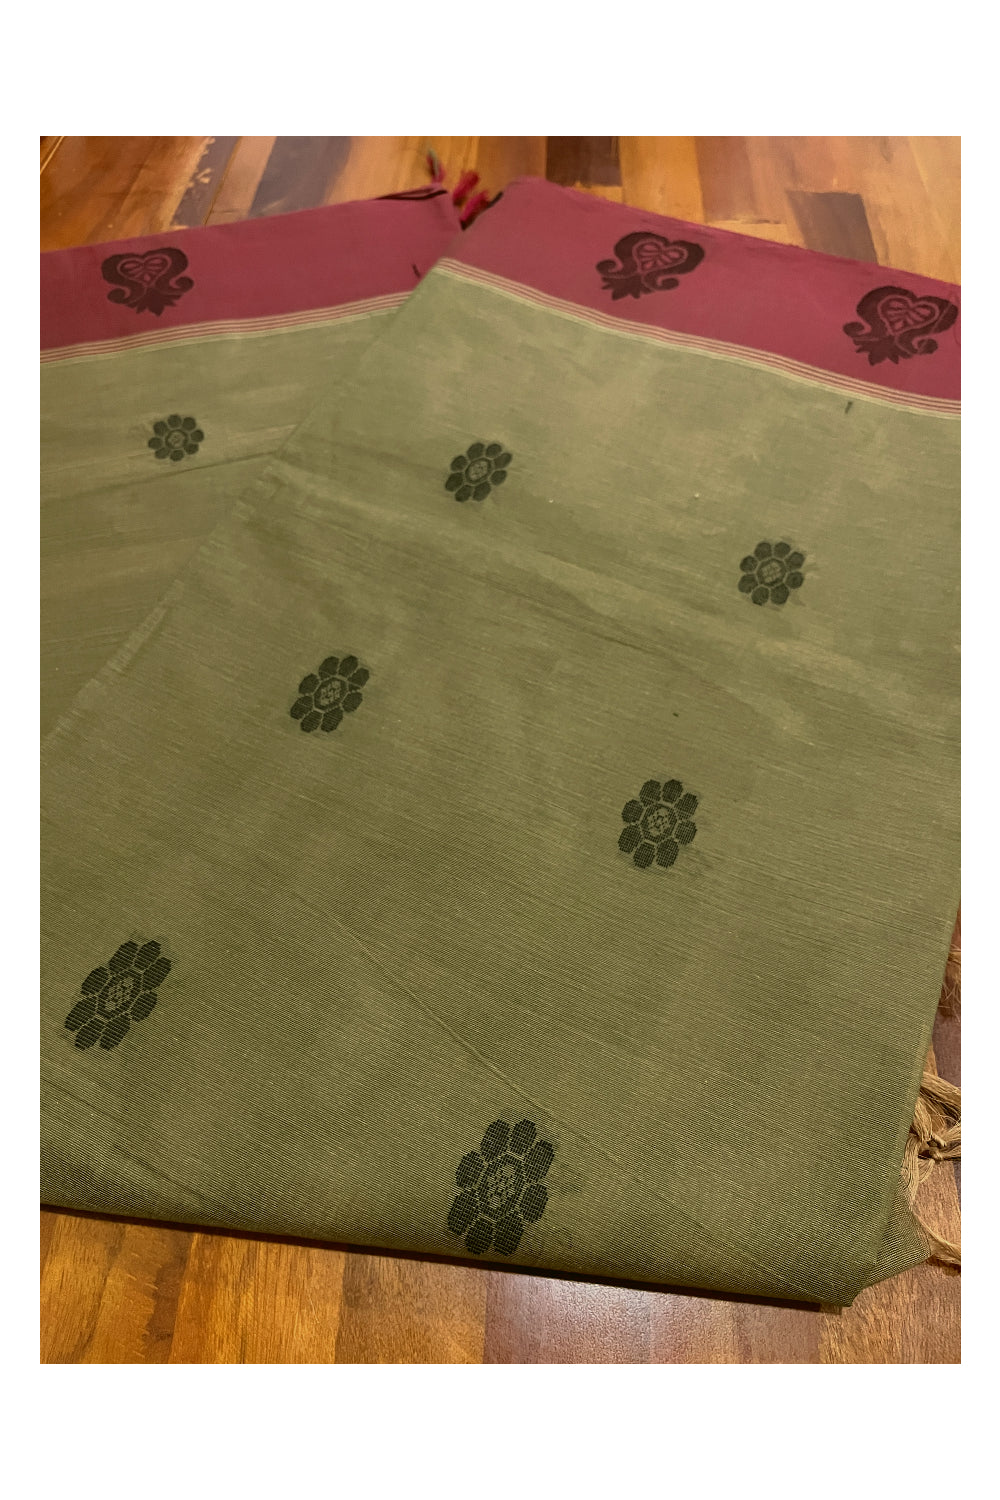 Southloom Cotton Green Saree with Dark Red Floral Woven Border